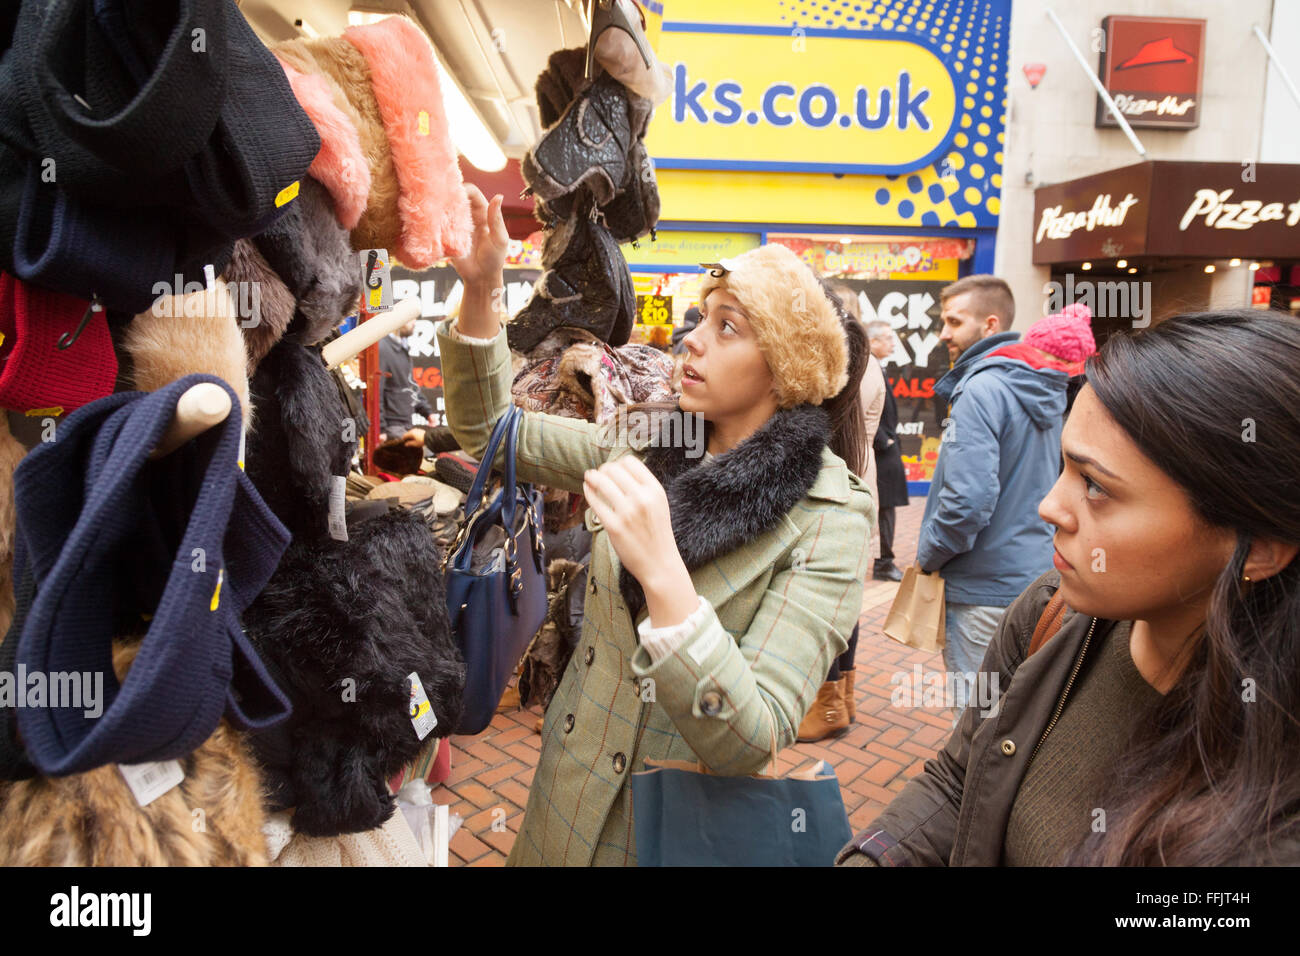 Two young women buying clothes at a market stall, Birmingham UK Stock Photo